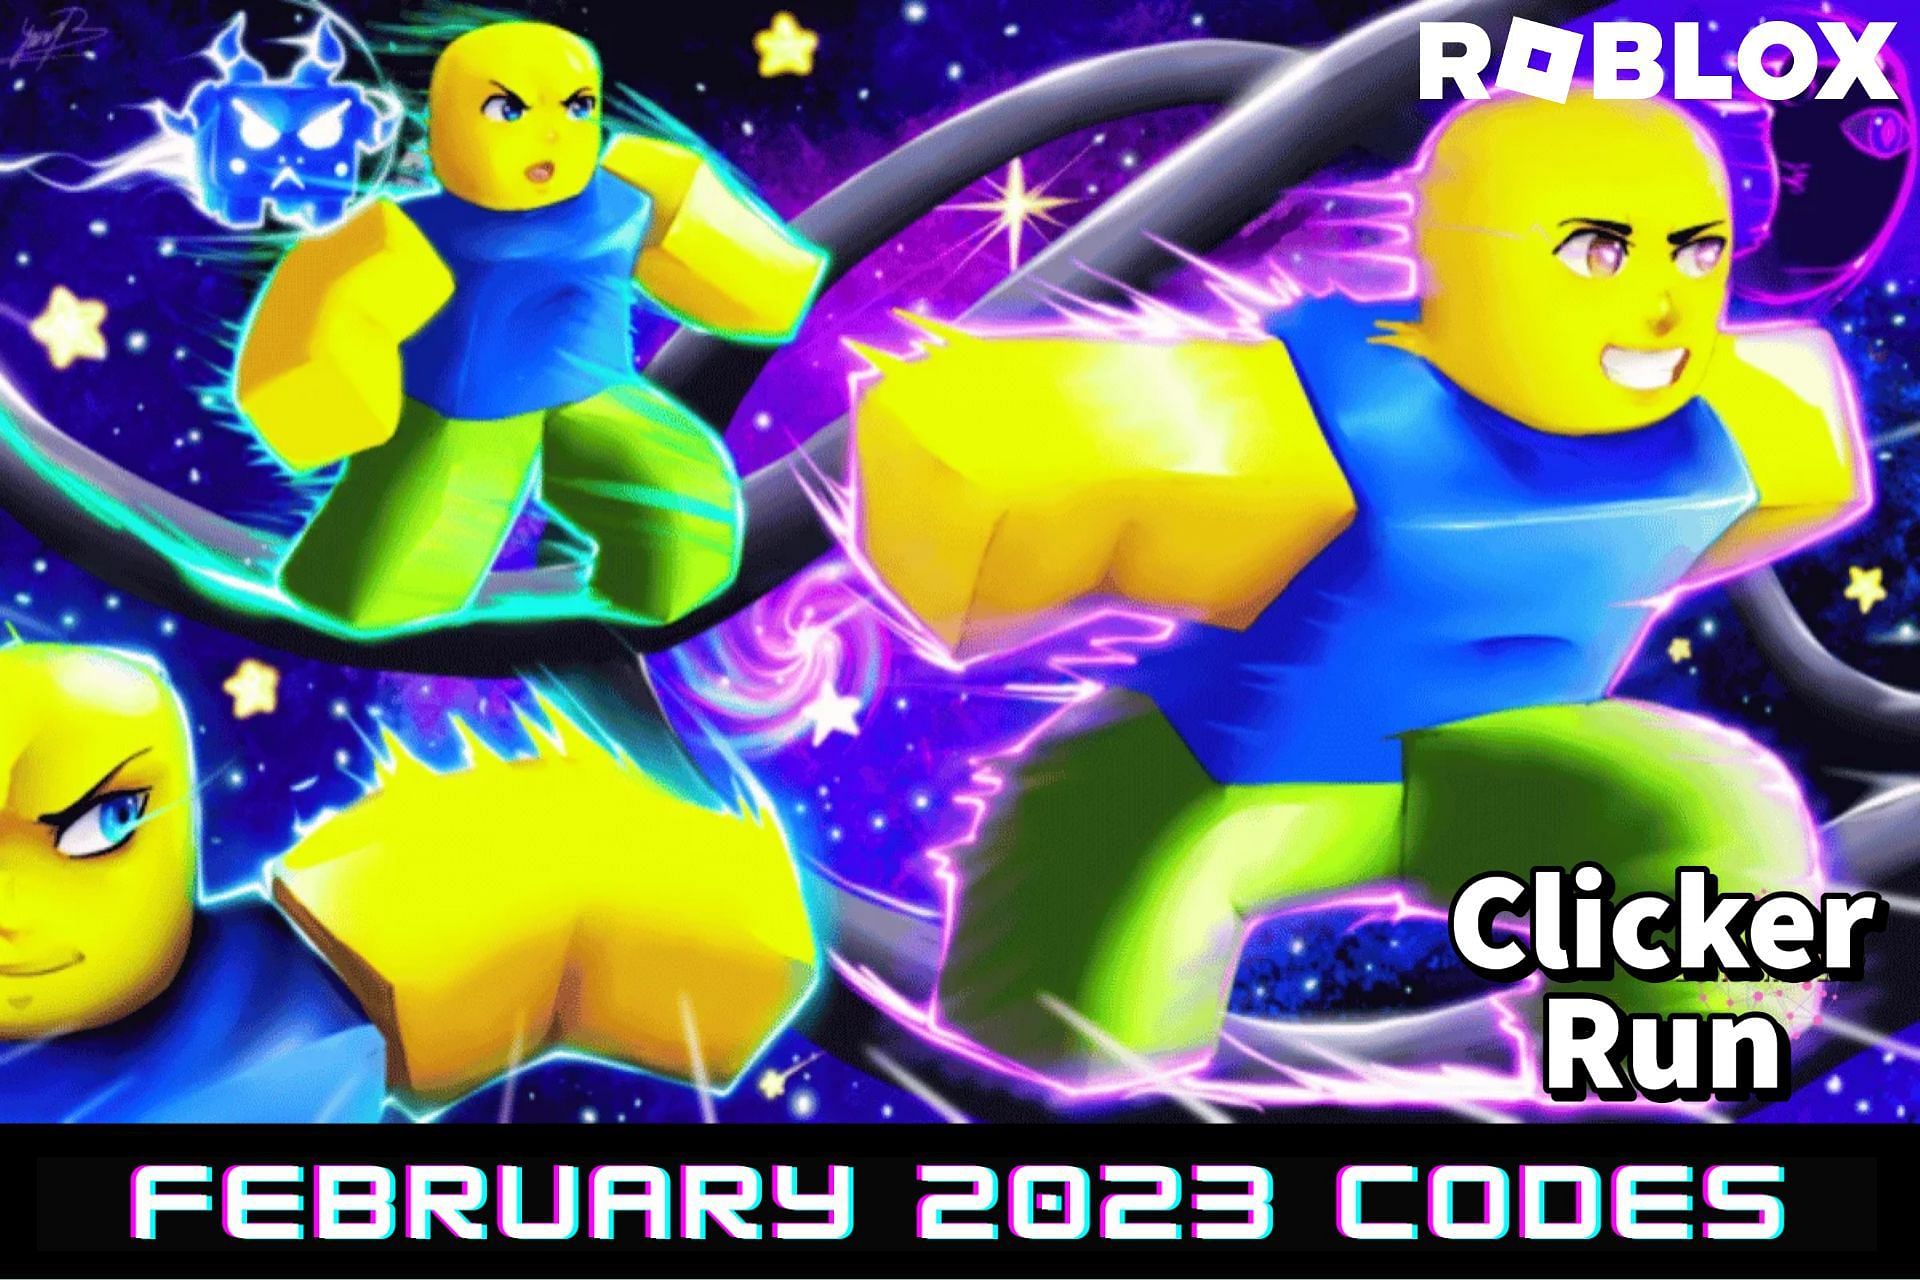 Roblox Clicker Run codes for February 2023: Free coins, boosts, and more